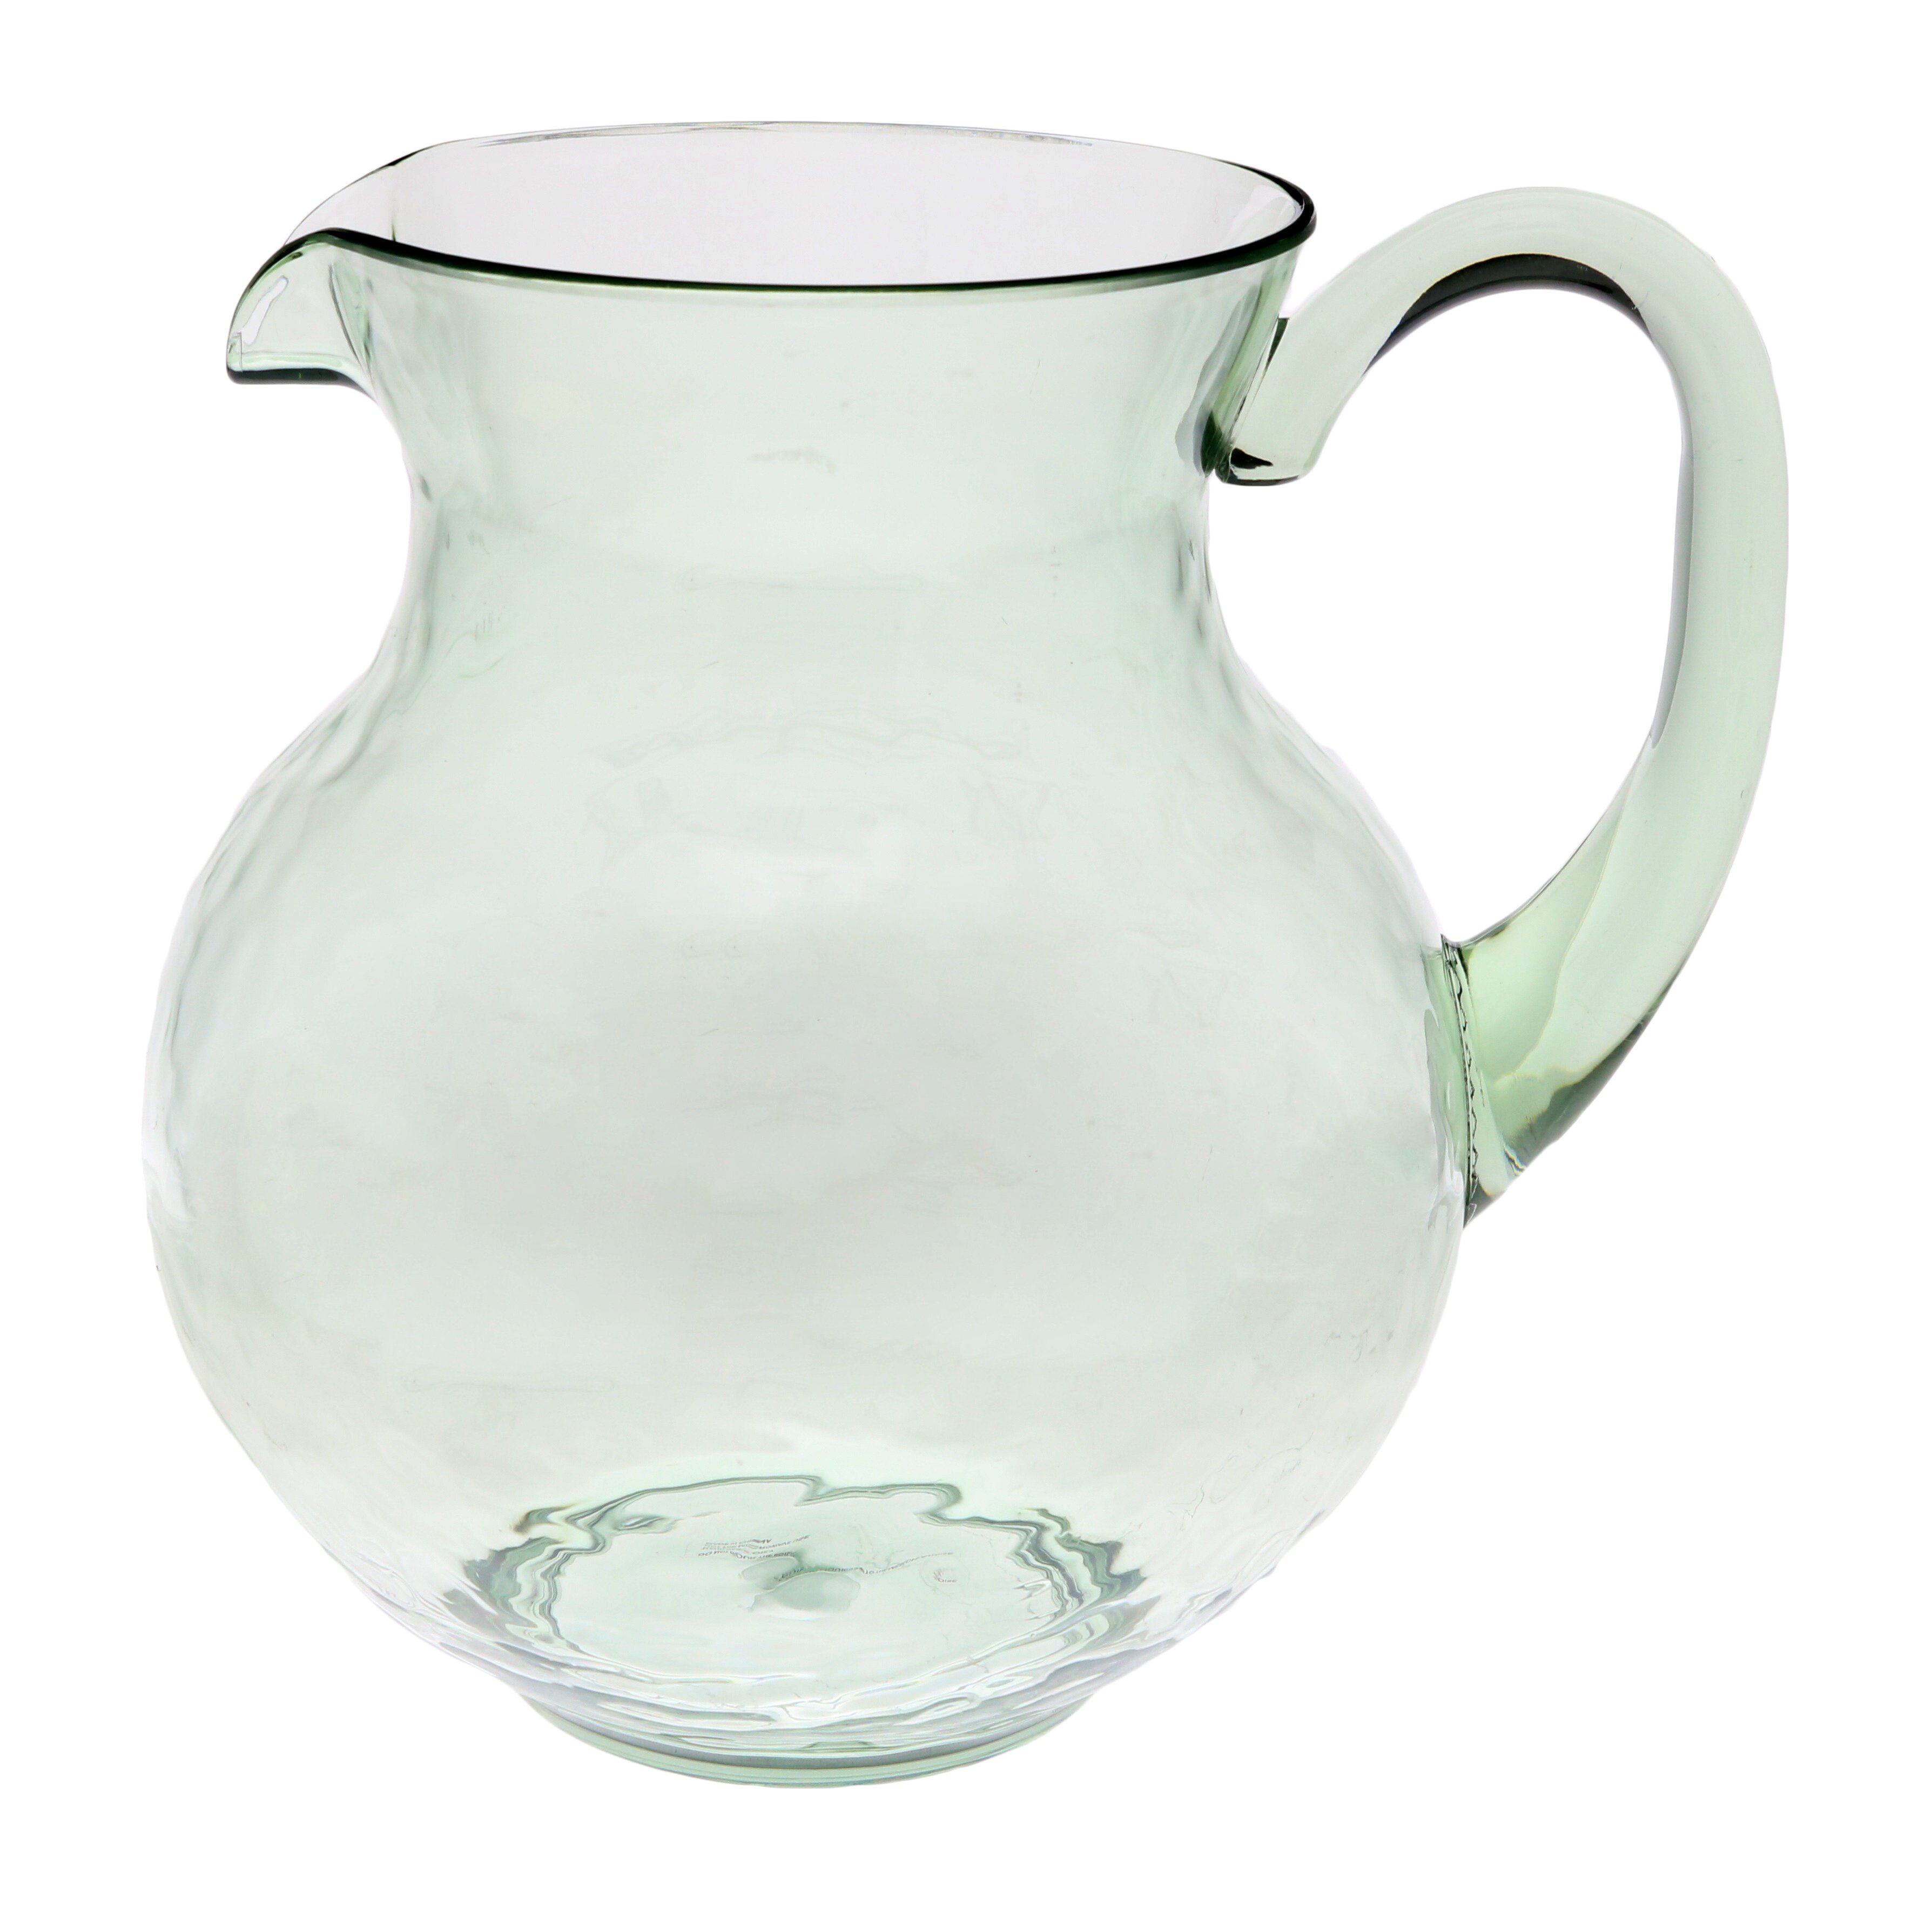 Castro Heras Large (25cm) Sangria Pitcher, Green with Colors: The Spanish  Table